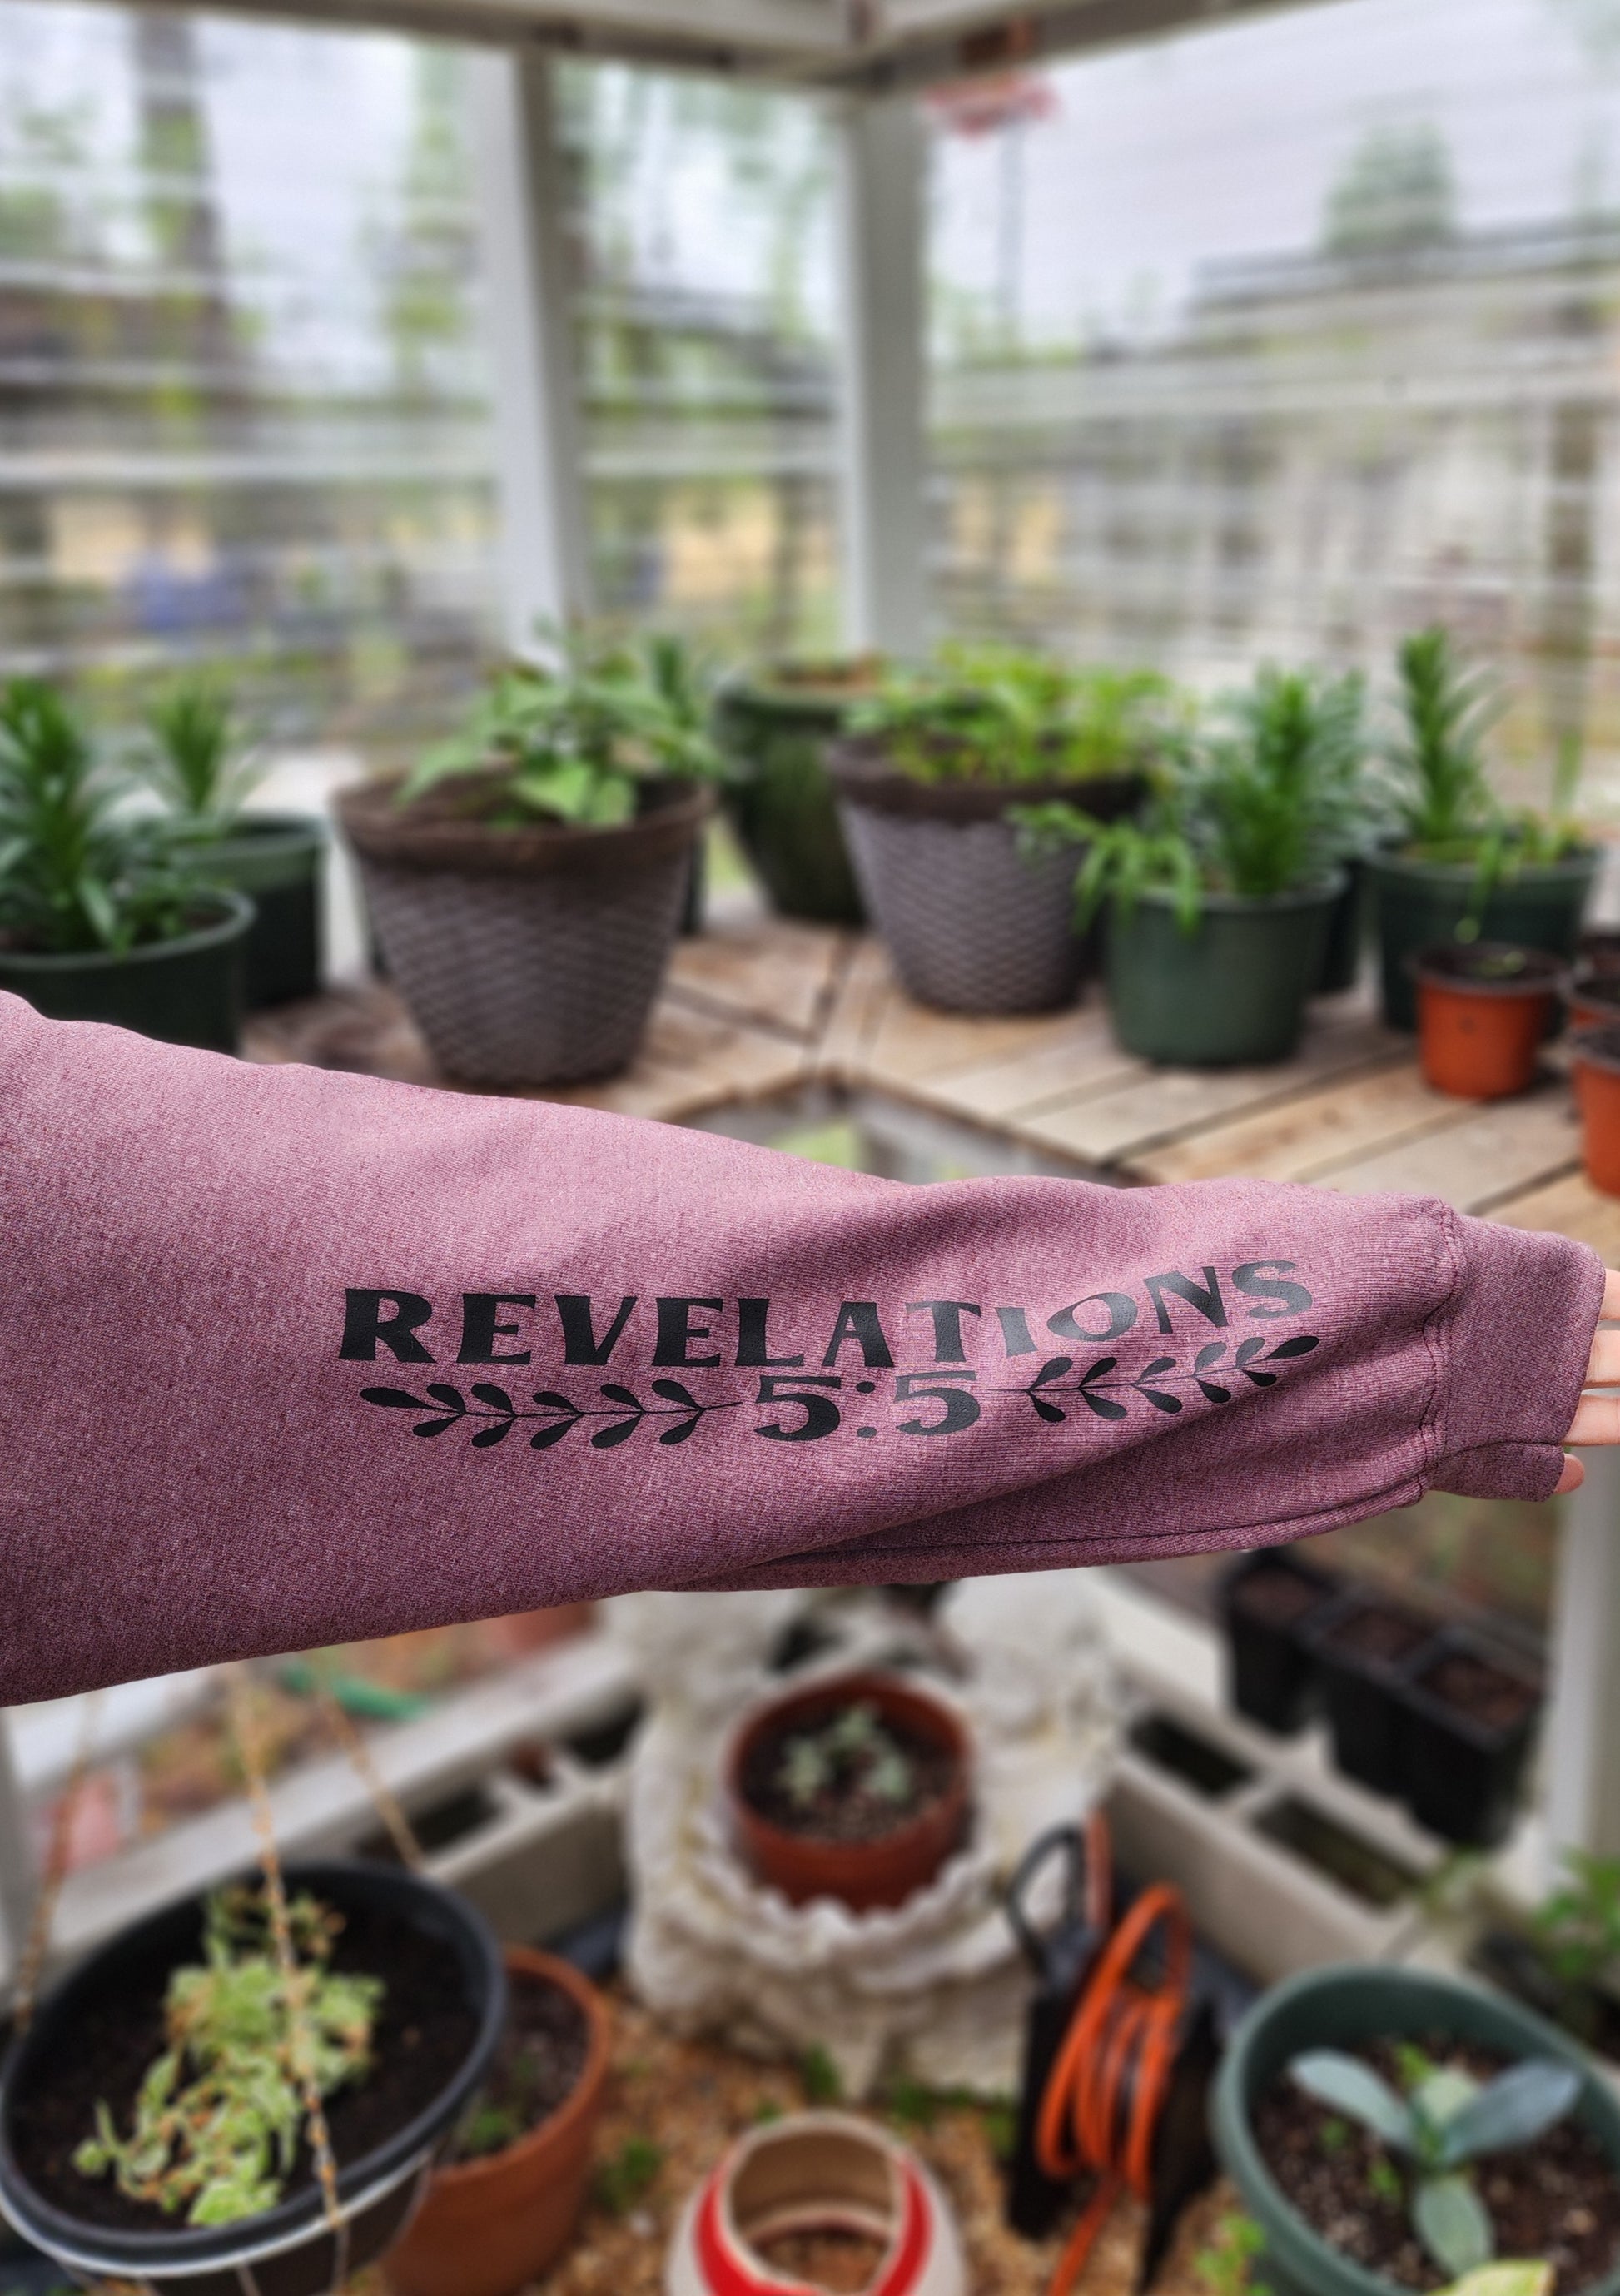 Christian hoodies with the word revelations 5:5 on the sleeve